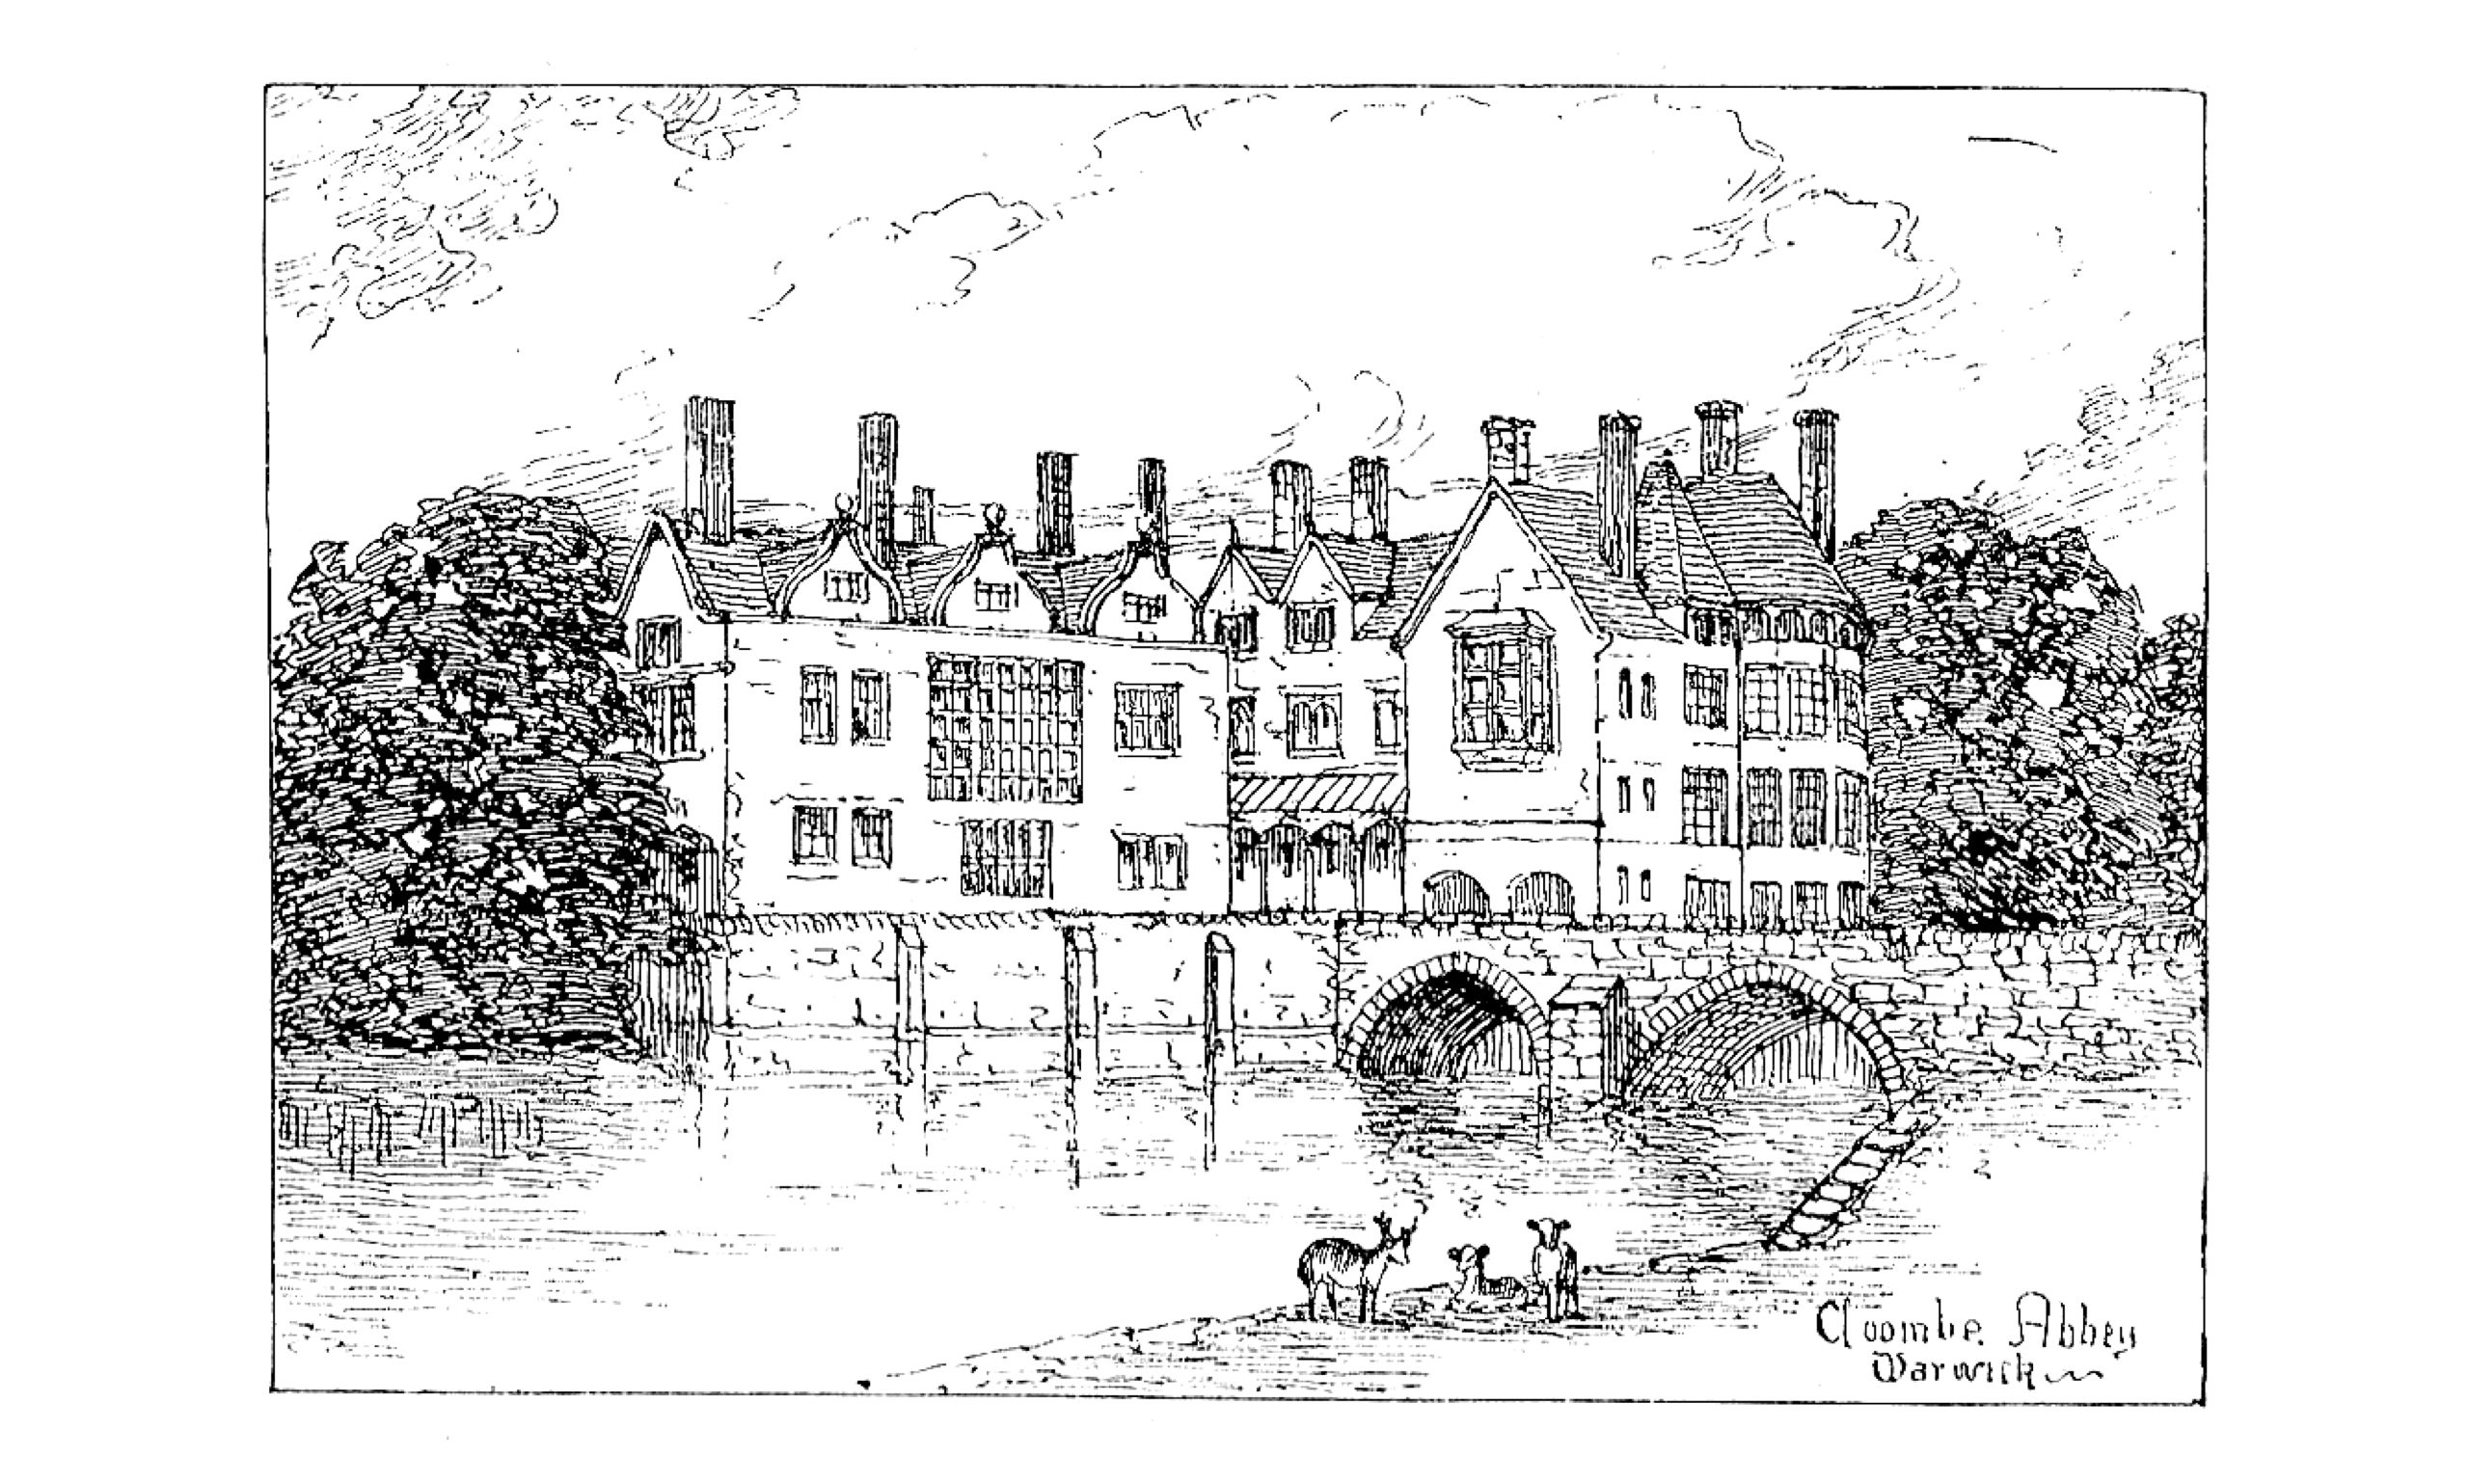 Coombe Abbey illustration